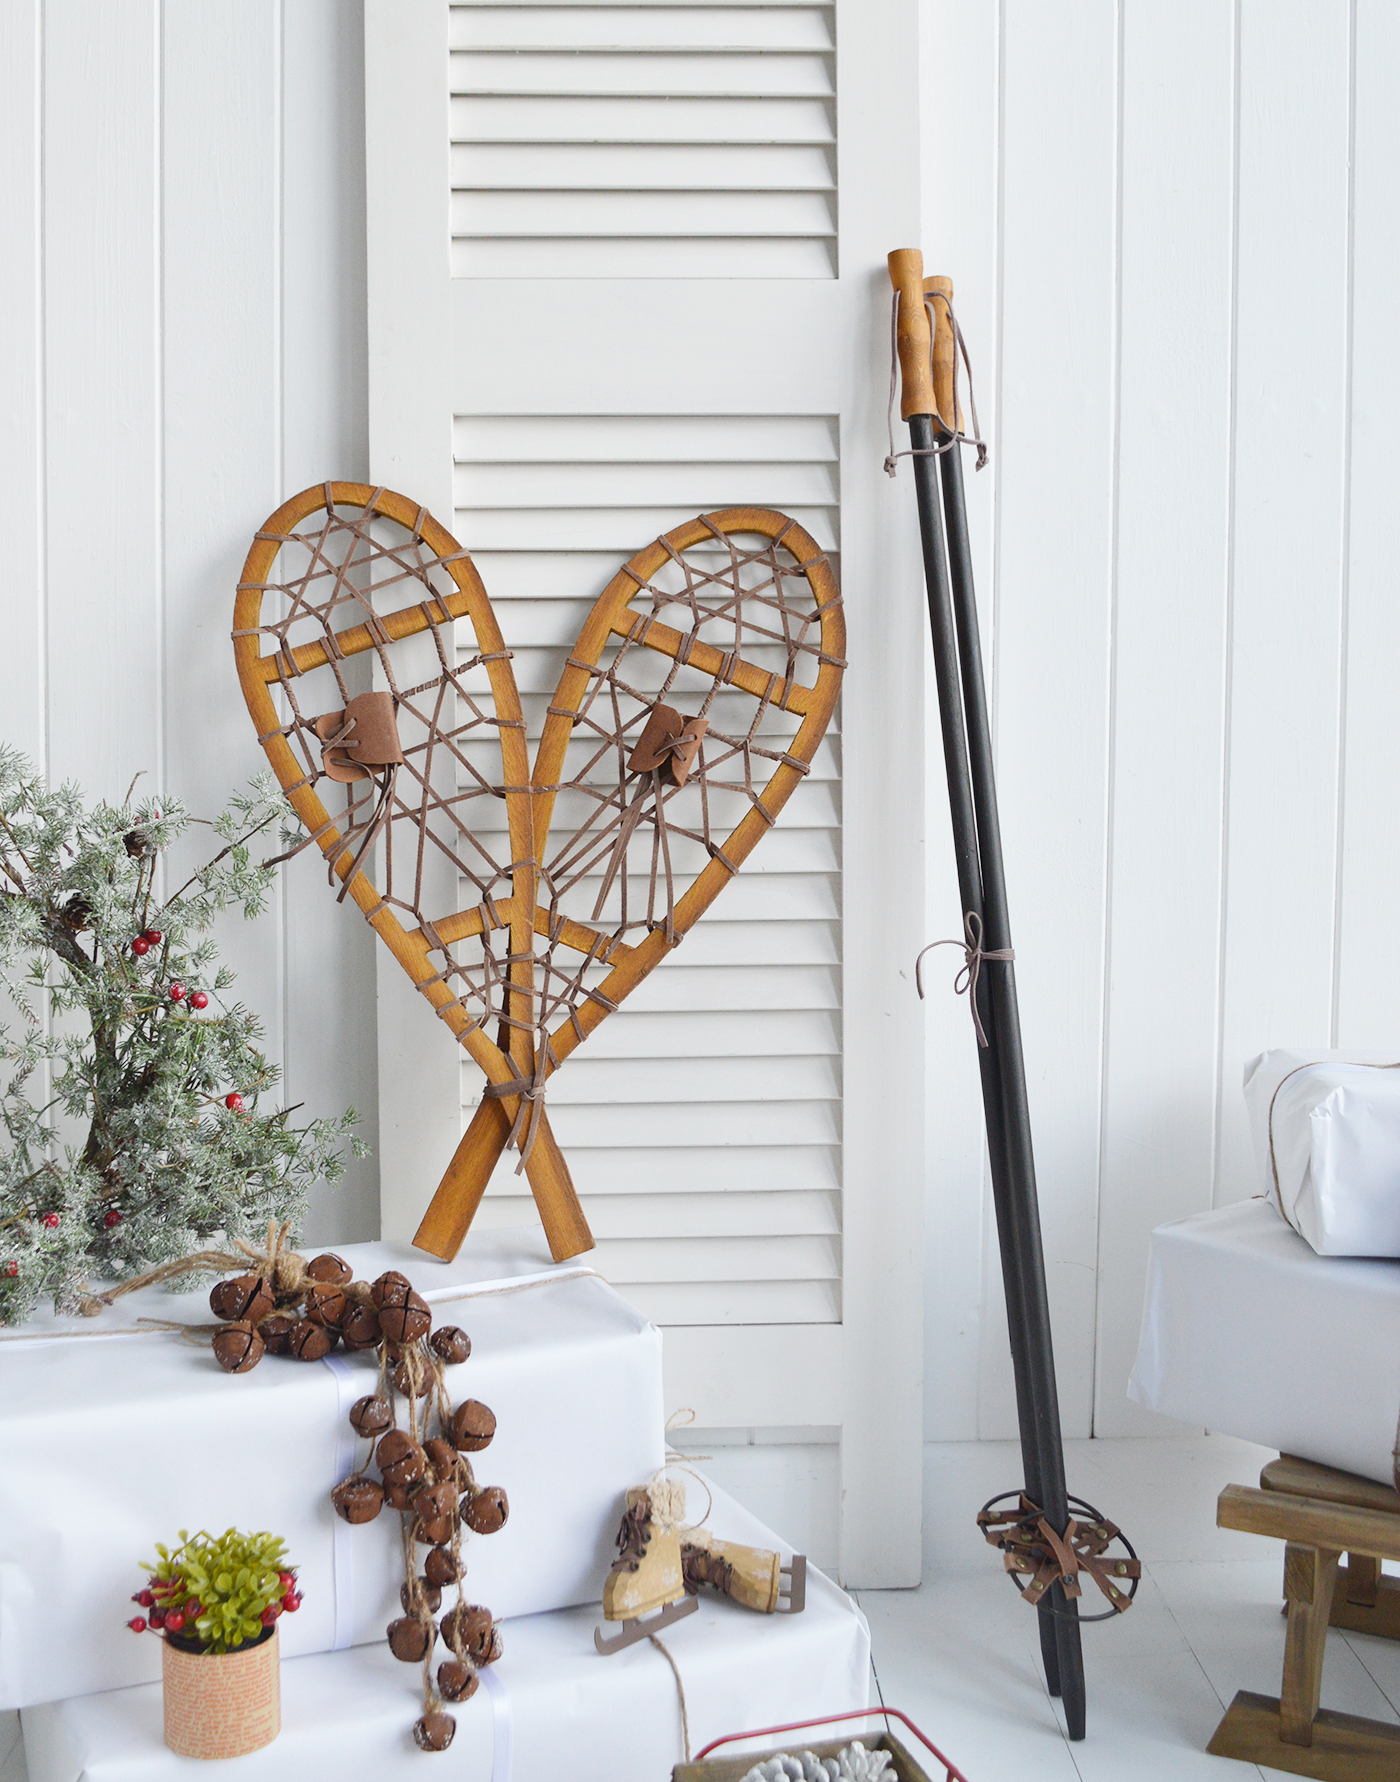 Wooden Snow Shoes as Ski Chalet Christmas Decor